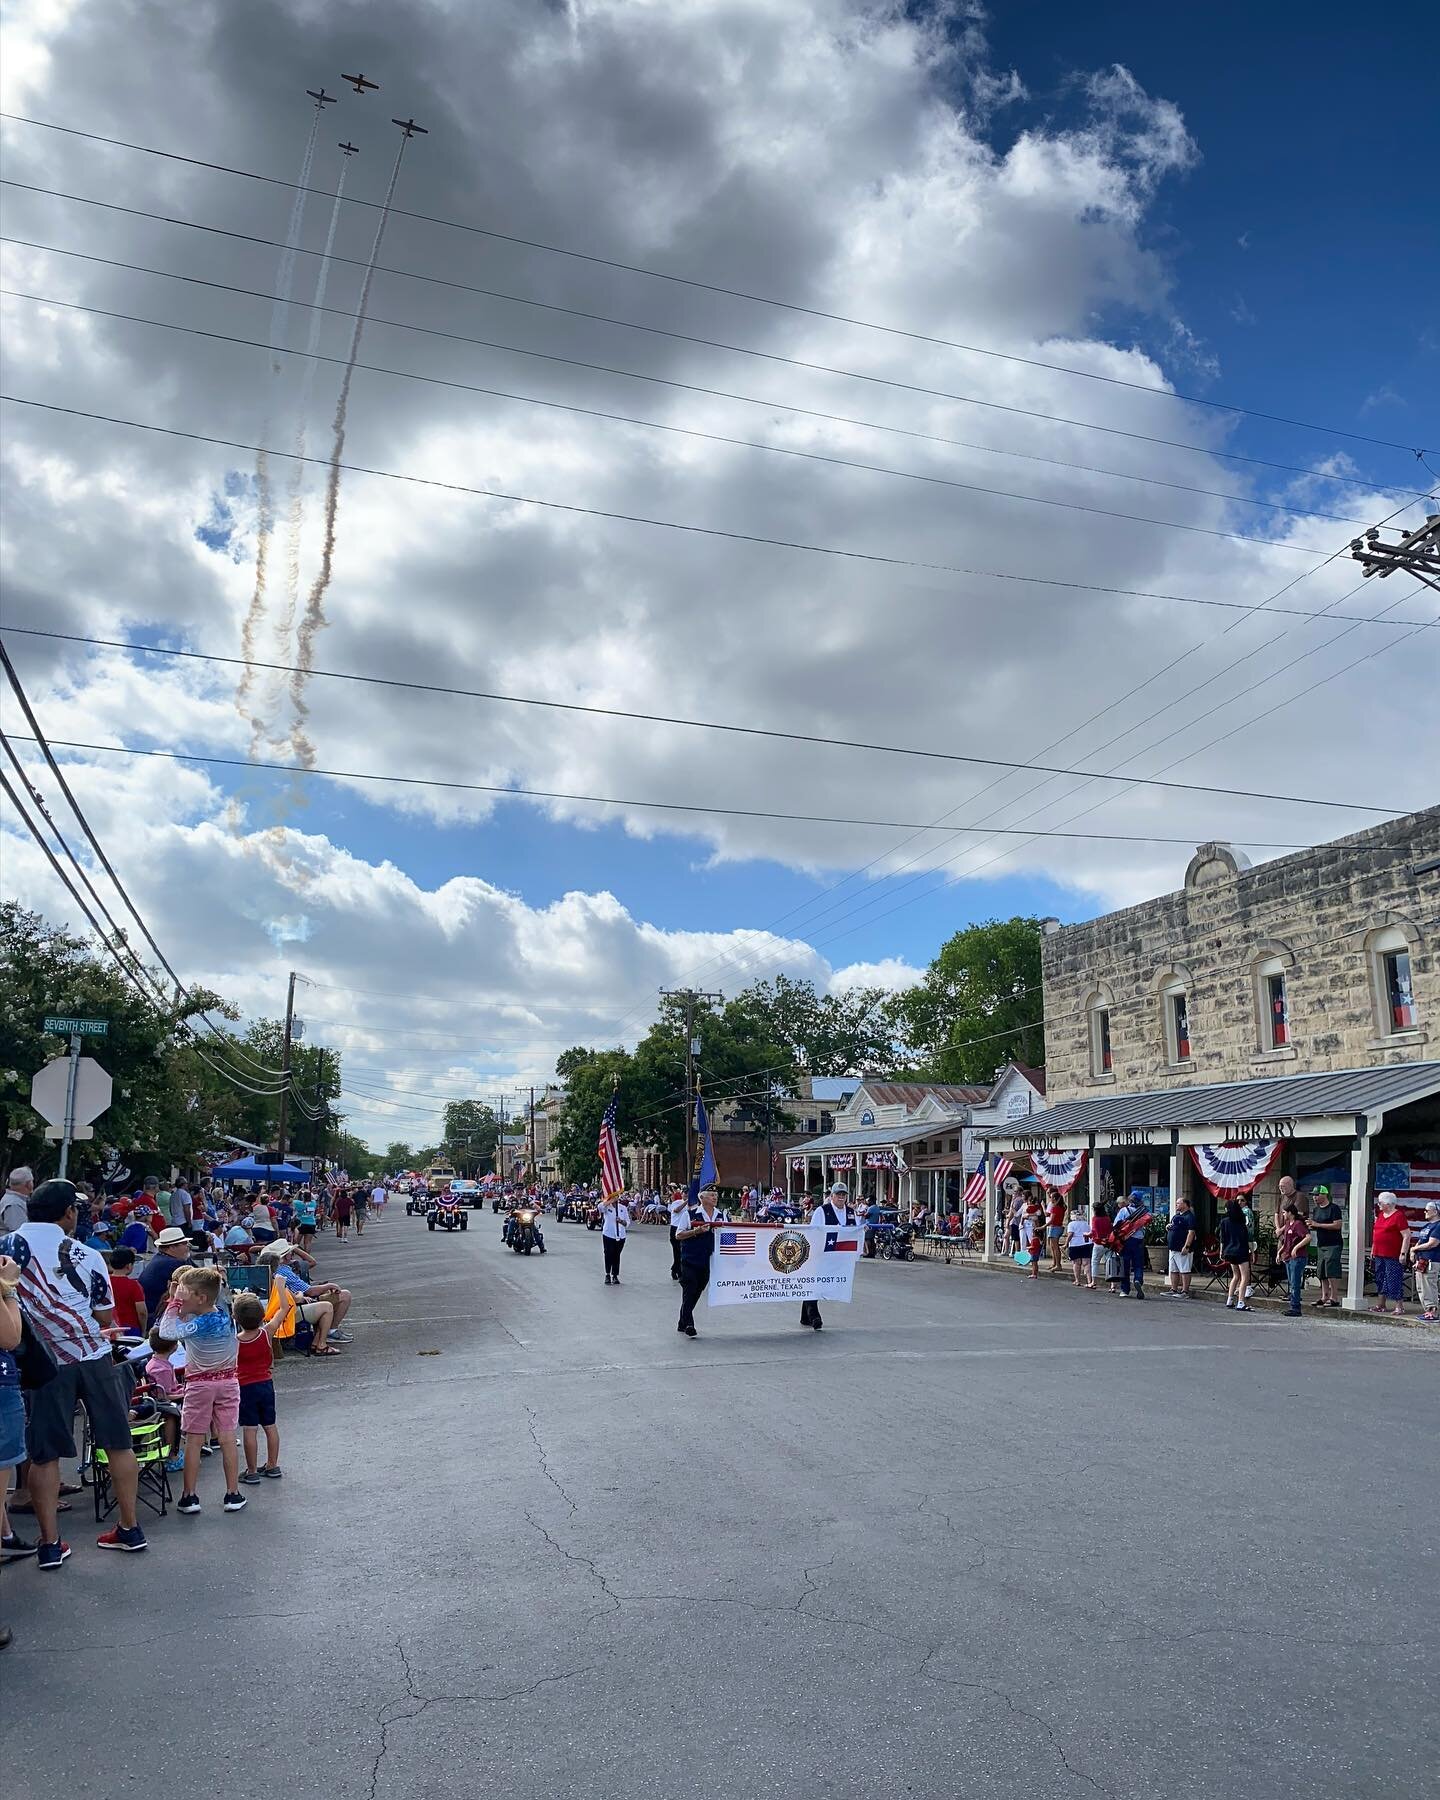 Small town USA and Main Street parades still exists. Happy Independance day y&rsquo;all.